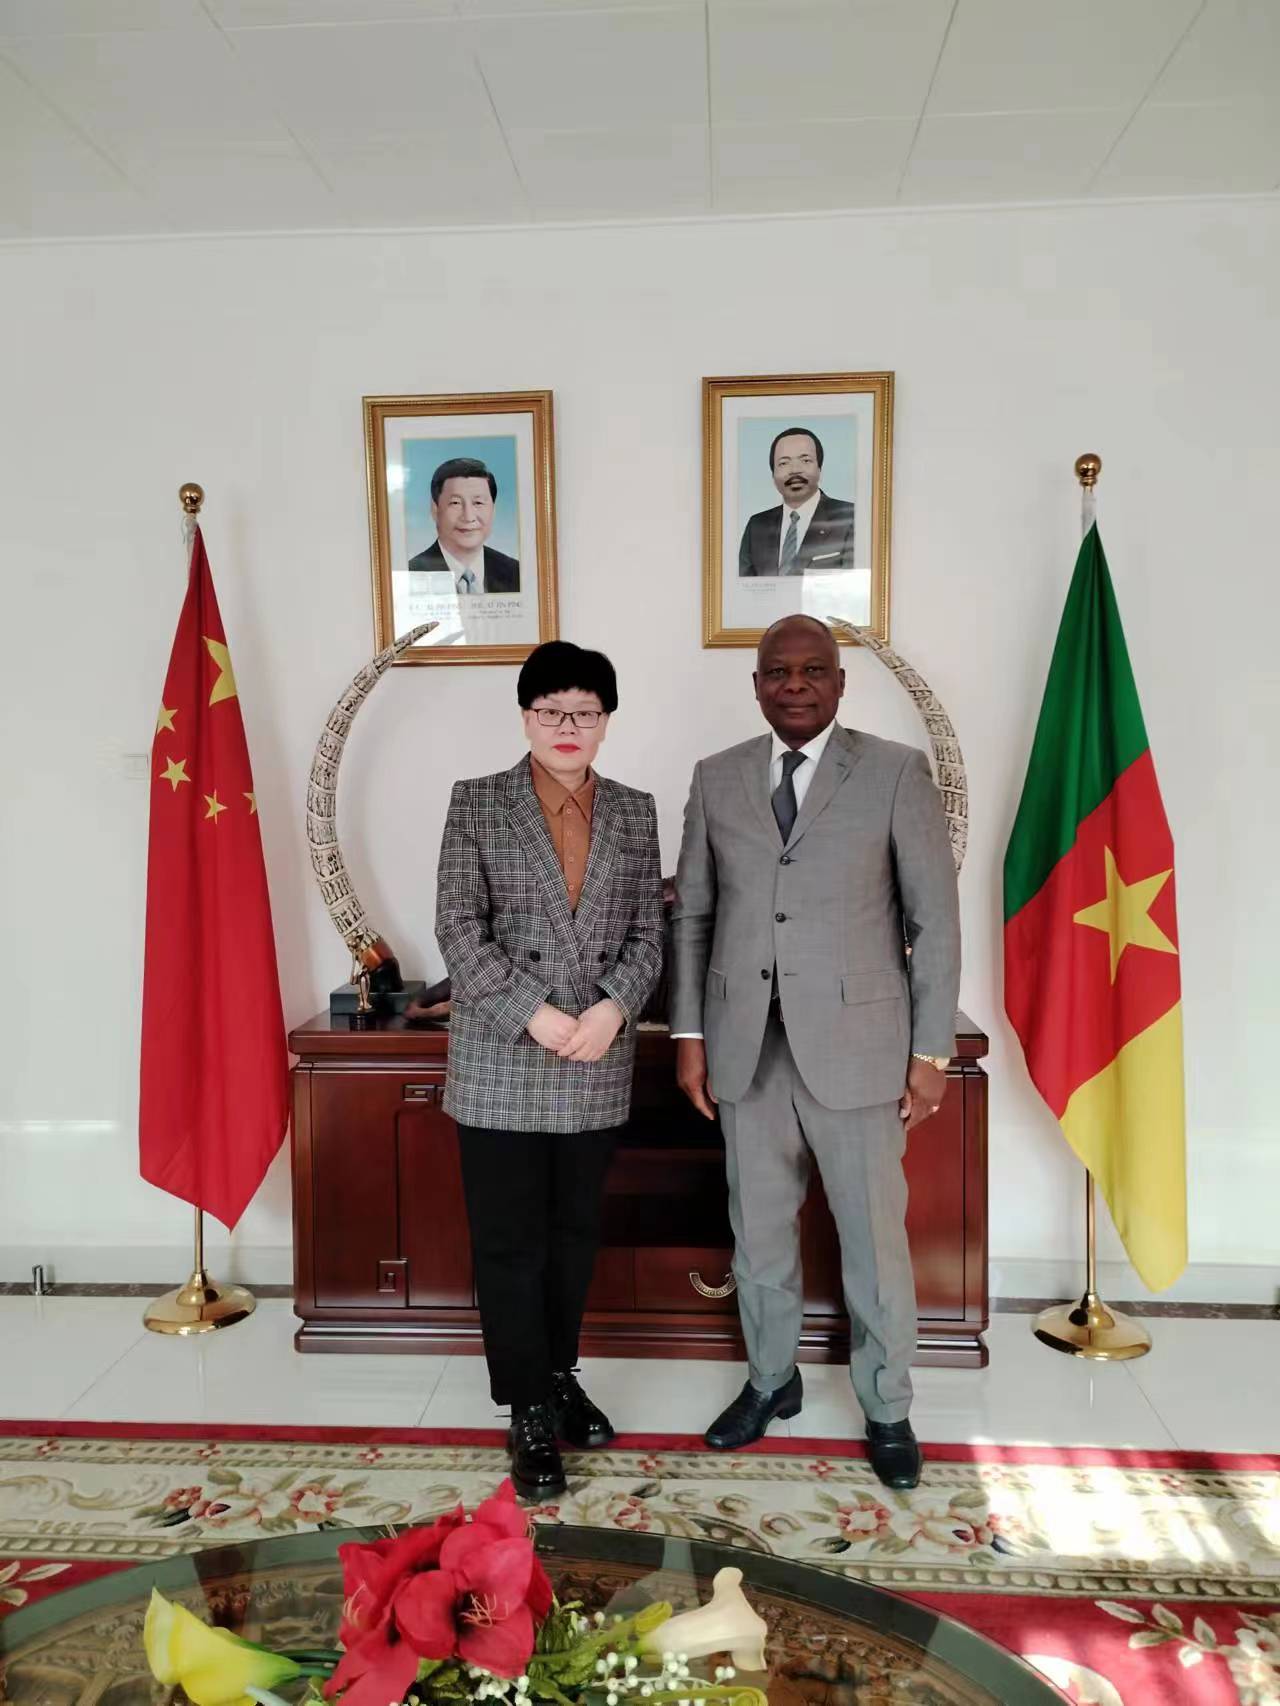 Ms. Hou Min, General manager of Shandong Limao Tong, visited the Embassy of Cameroon to promote the economic and trade cooperation between China and Cameroon